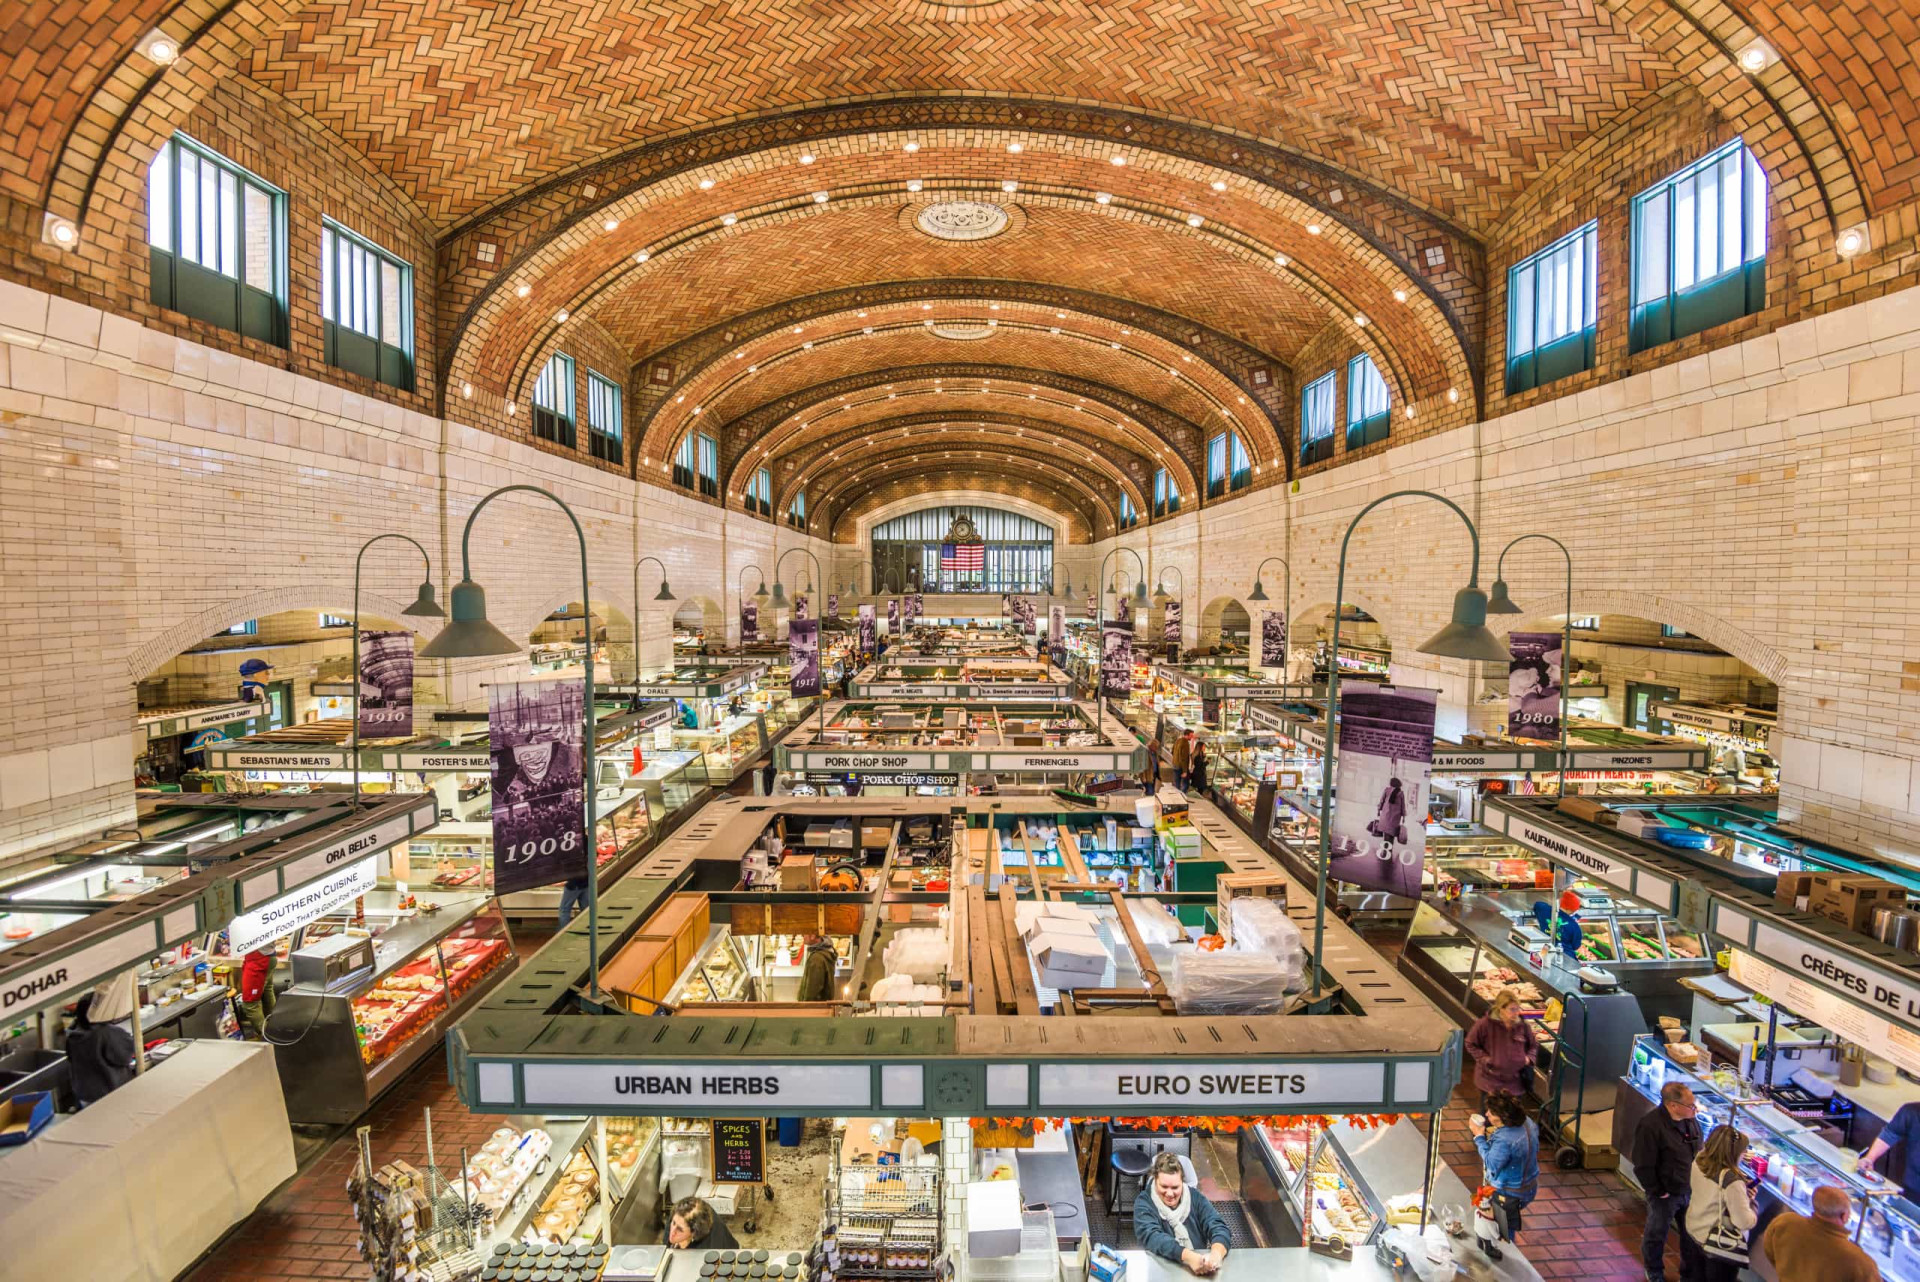 <p>A cacophony of sound reverberates over the many colorful stalls of the historic West Side Market, a city landmark known for its fantastic variety of delicious ethnic produce.</p><p>You may also like:<a href="https://www.starsinsider.com/n/357272?utm_source=msn.com&utm_medium=display&utm_campaign=referral_description&utm_content=198095v22en-en"> Fascinating photos of World War II</a></p>